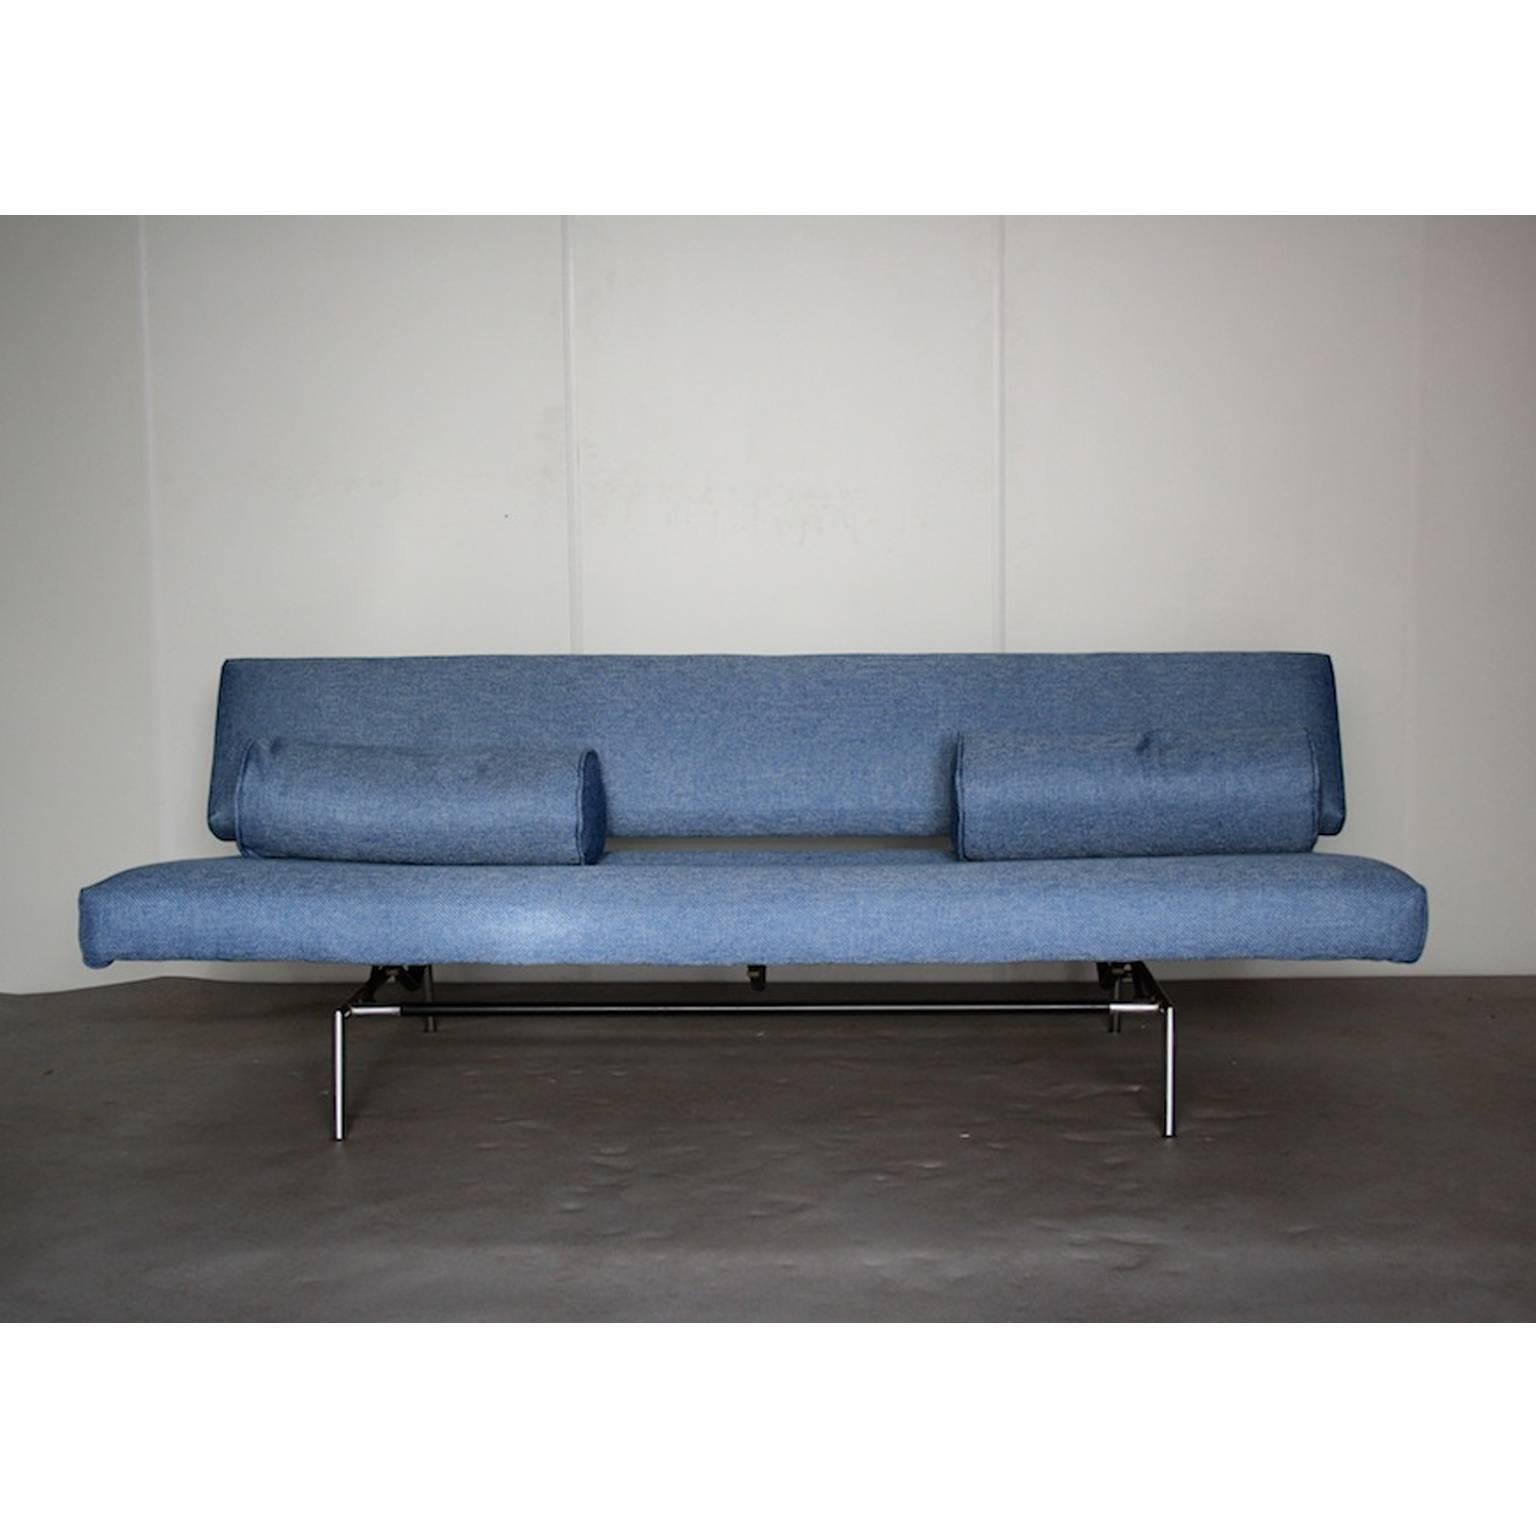 Mid-Century Modern BR 02.7 Sleeper Sofa with Arm Rests by Martin Visser for 't Spectrum, Dutch For Sale